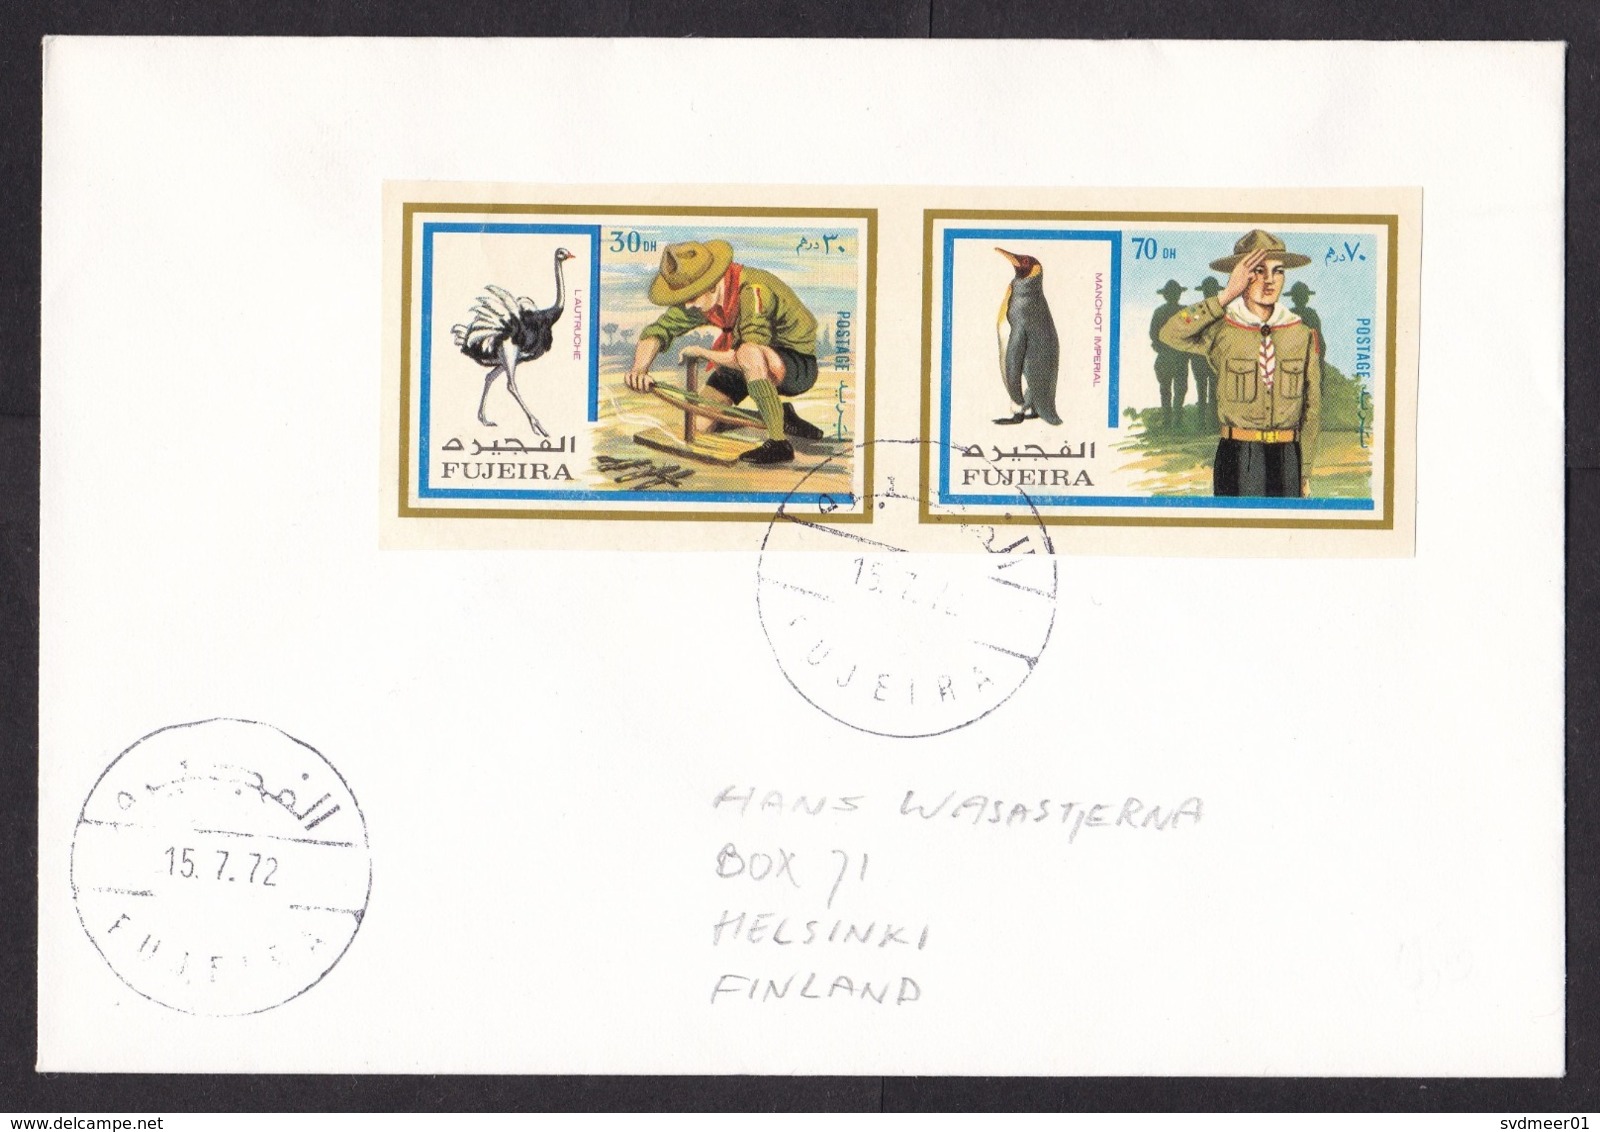 Fujeira: Cover To Finland, 1972, Pair Of Imperforated Stamps, Scouting, Ostrich, Penguin, Rare Real Use! (traces Of Use) - Fujeira